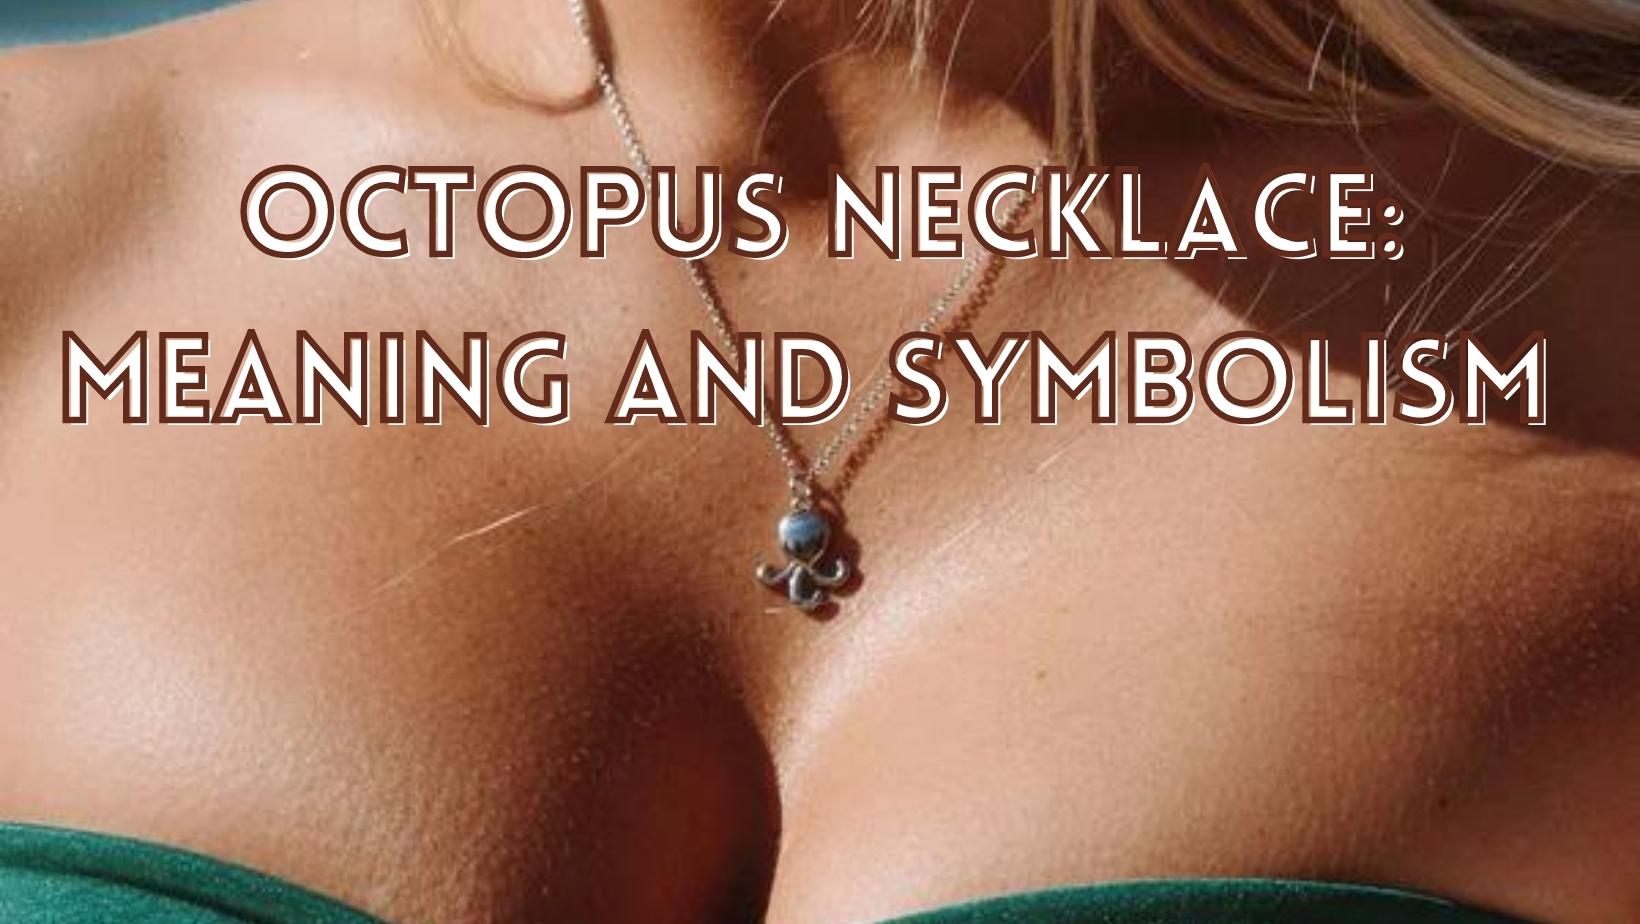 Interesting meaning and symbolism of octopus necklace